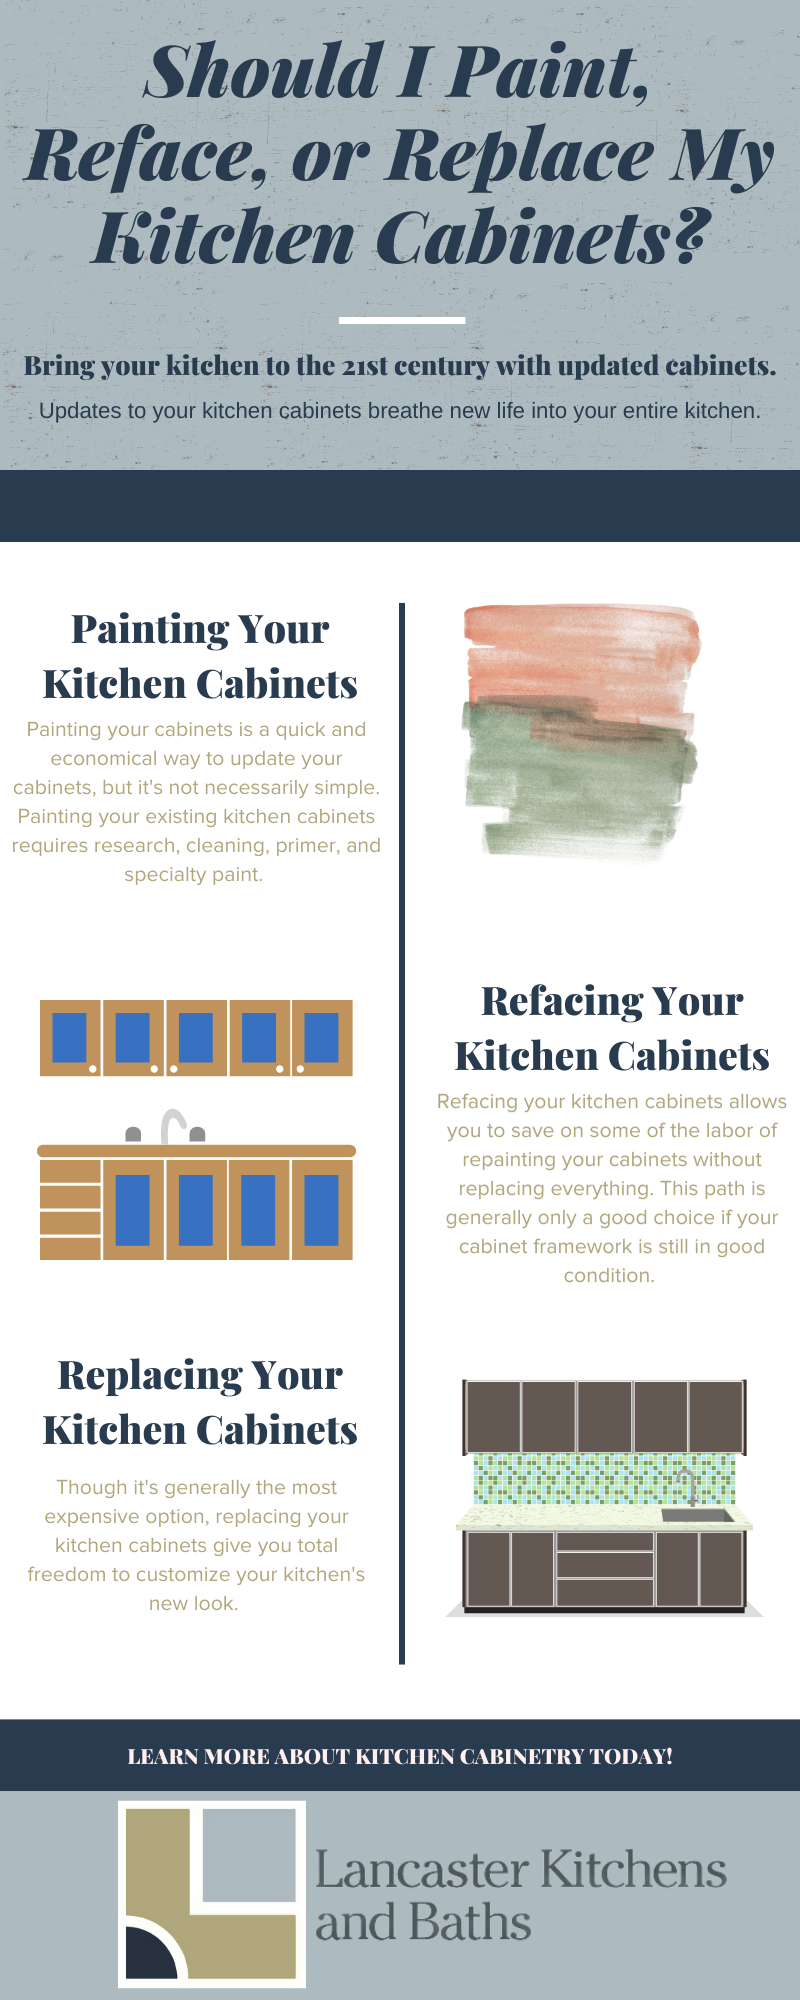 An infographic displaying the differences between painting, refacing, and replacing kitchen cabinets